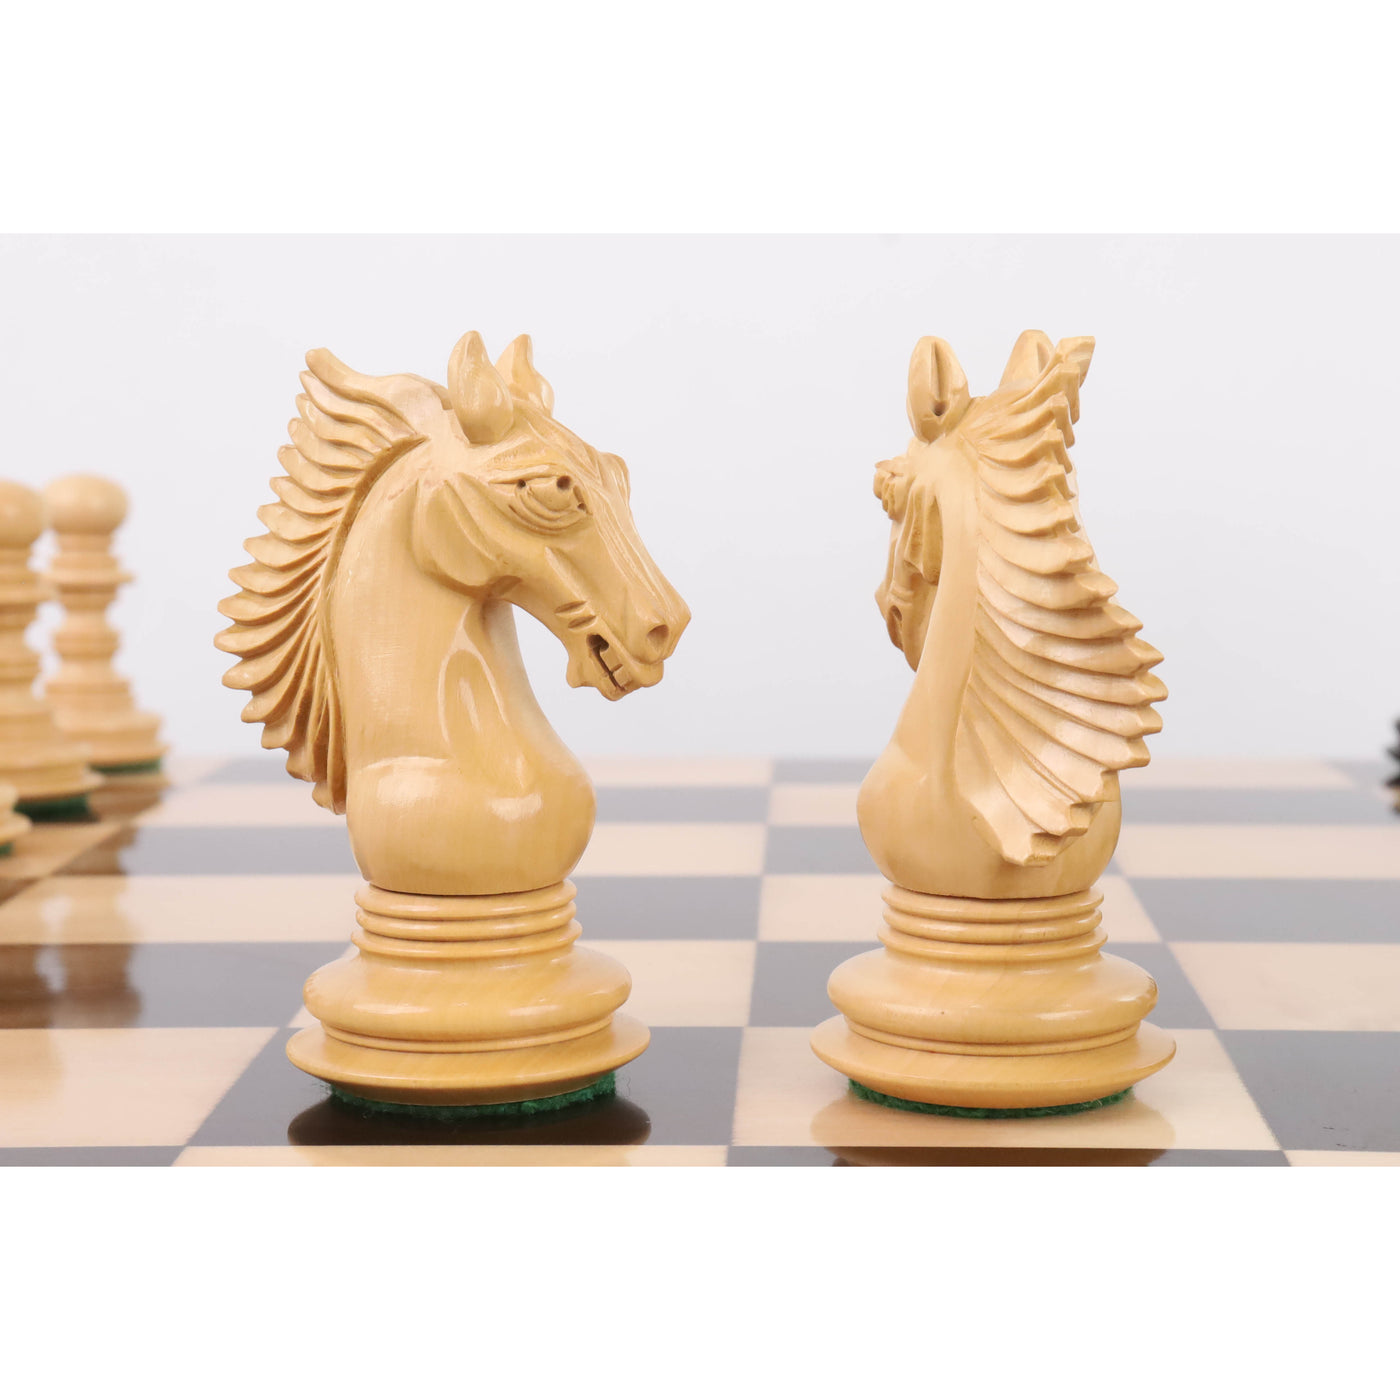 4.5" Gallant Knight Luxury Staunton Chess Set- Chess Pieces Only - Triple Weighted - Ebony Wood